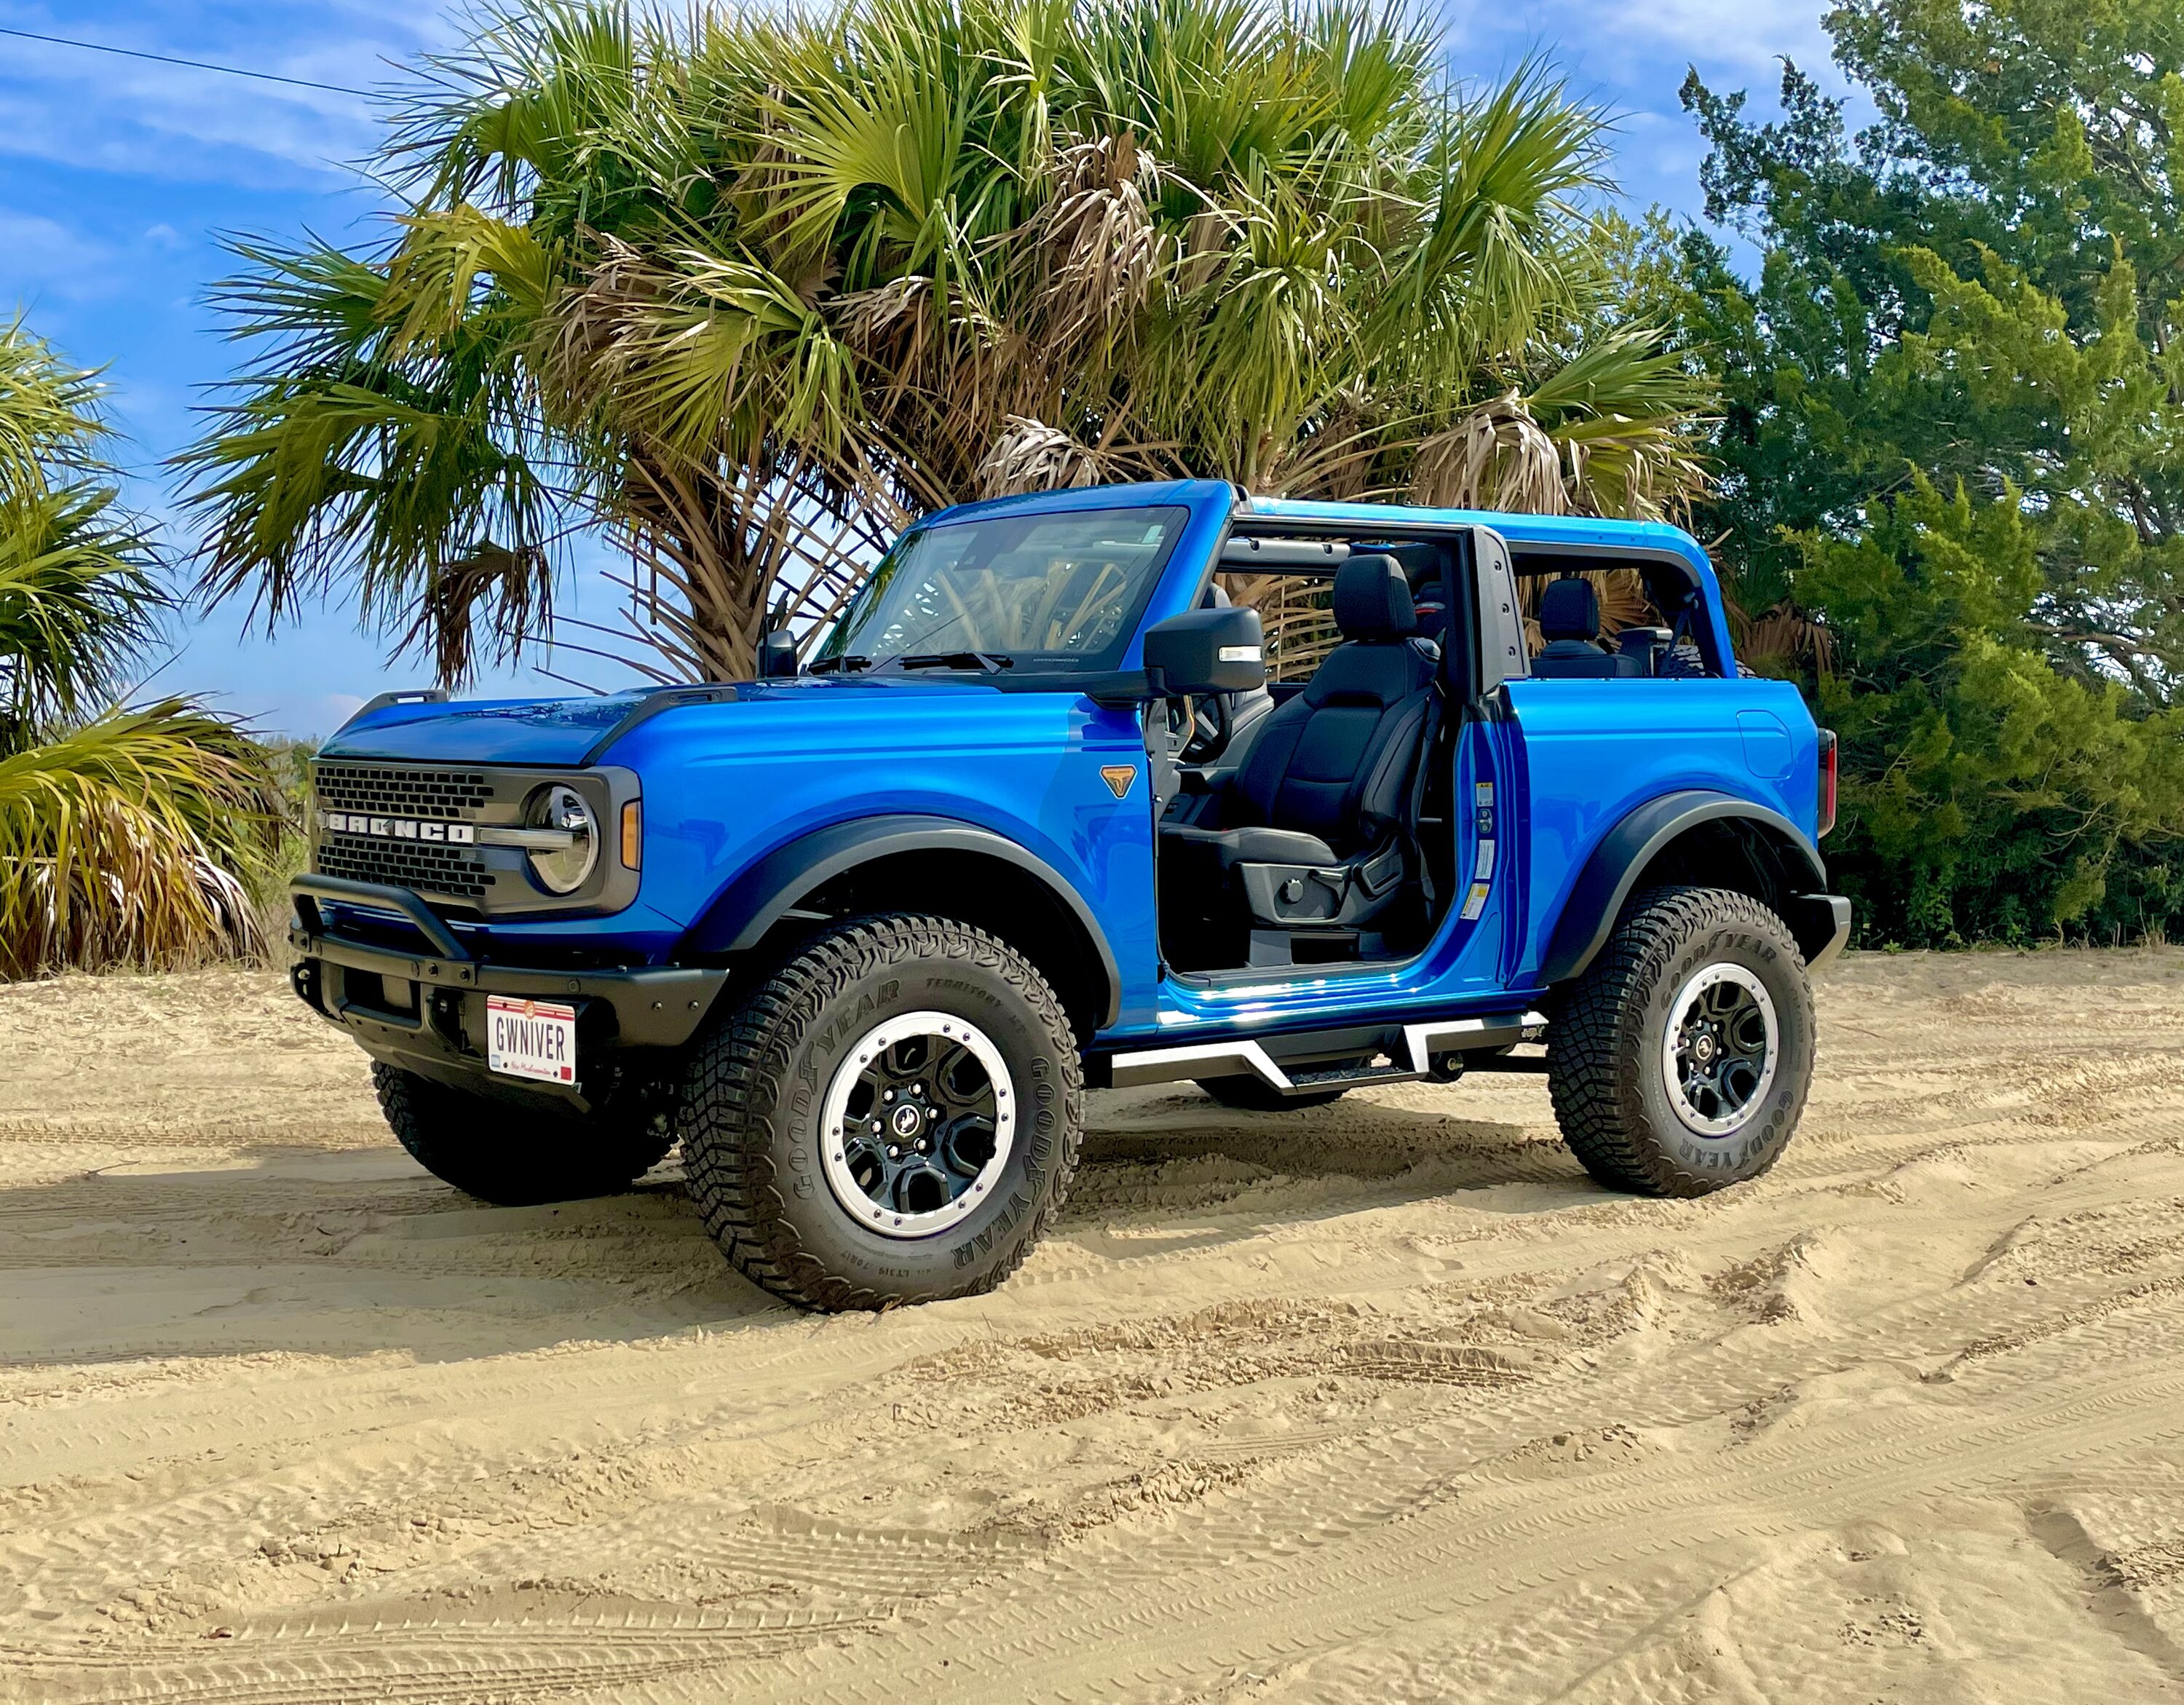 Ford Bronco Let’s see your favorite picture of your Bronco! 42D1C023-9543-4070-935C-BED6B2278168